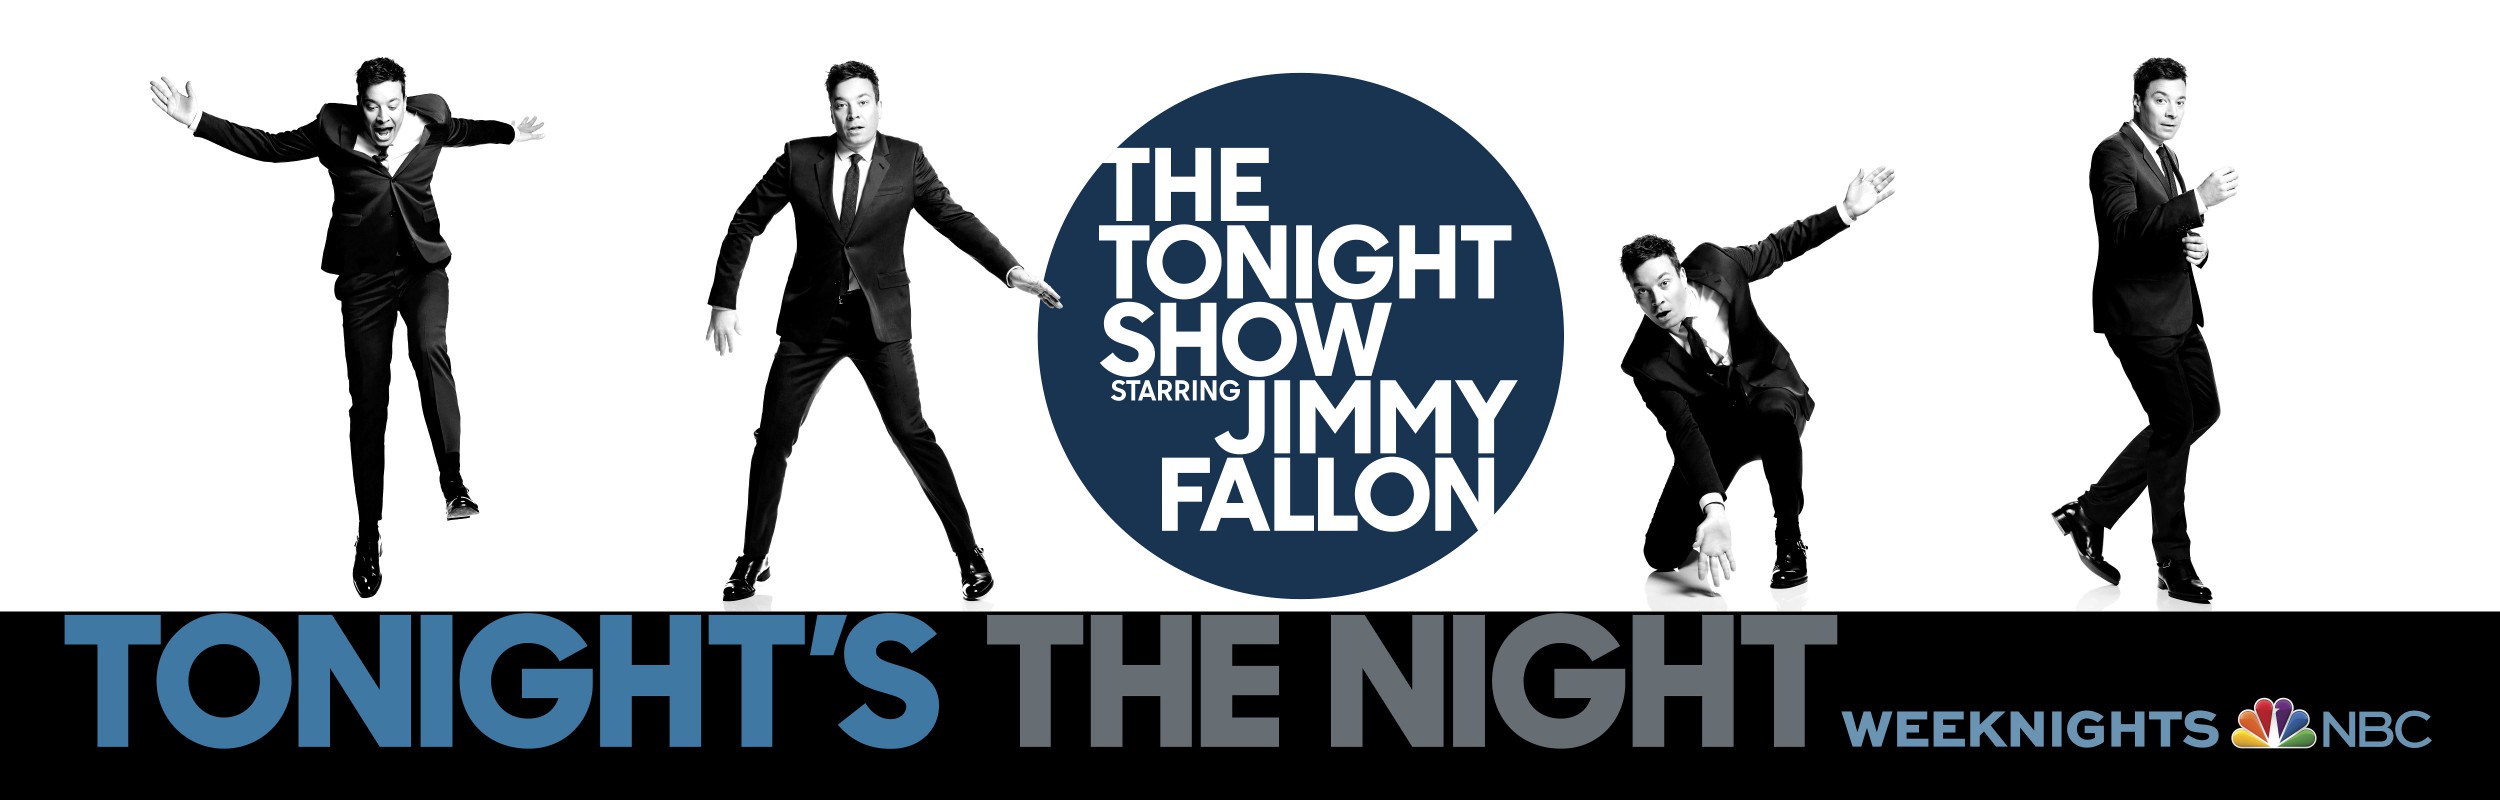 Mega Sized TV Poster Image for The Tonight Show Starring Jimmy Fallon (#2 of 3)